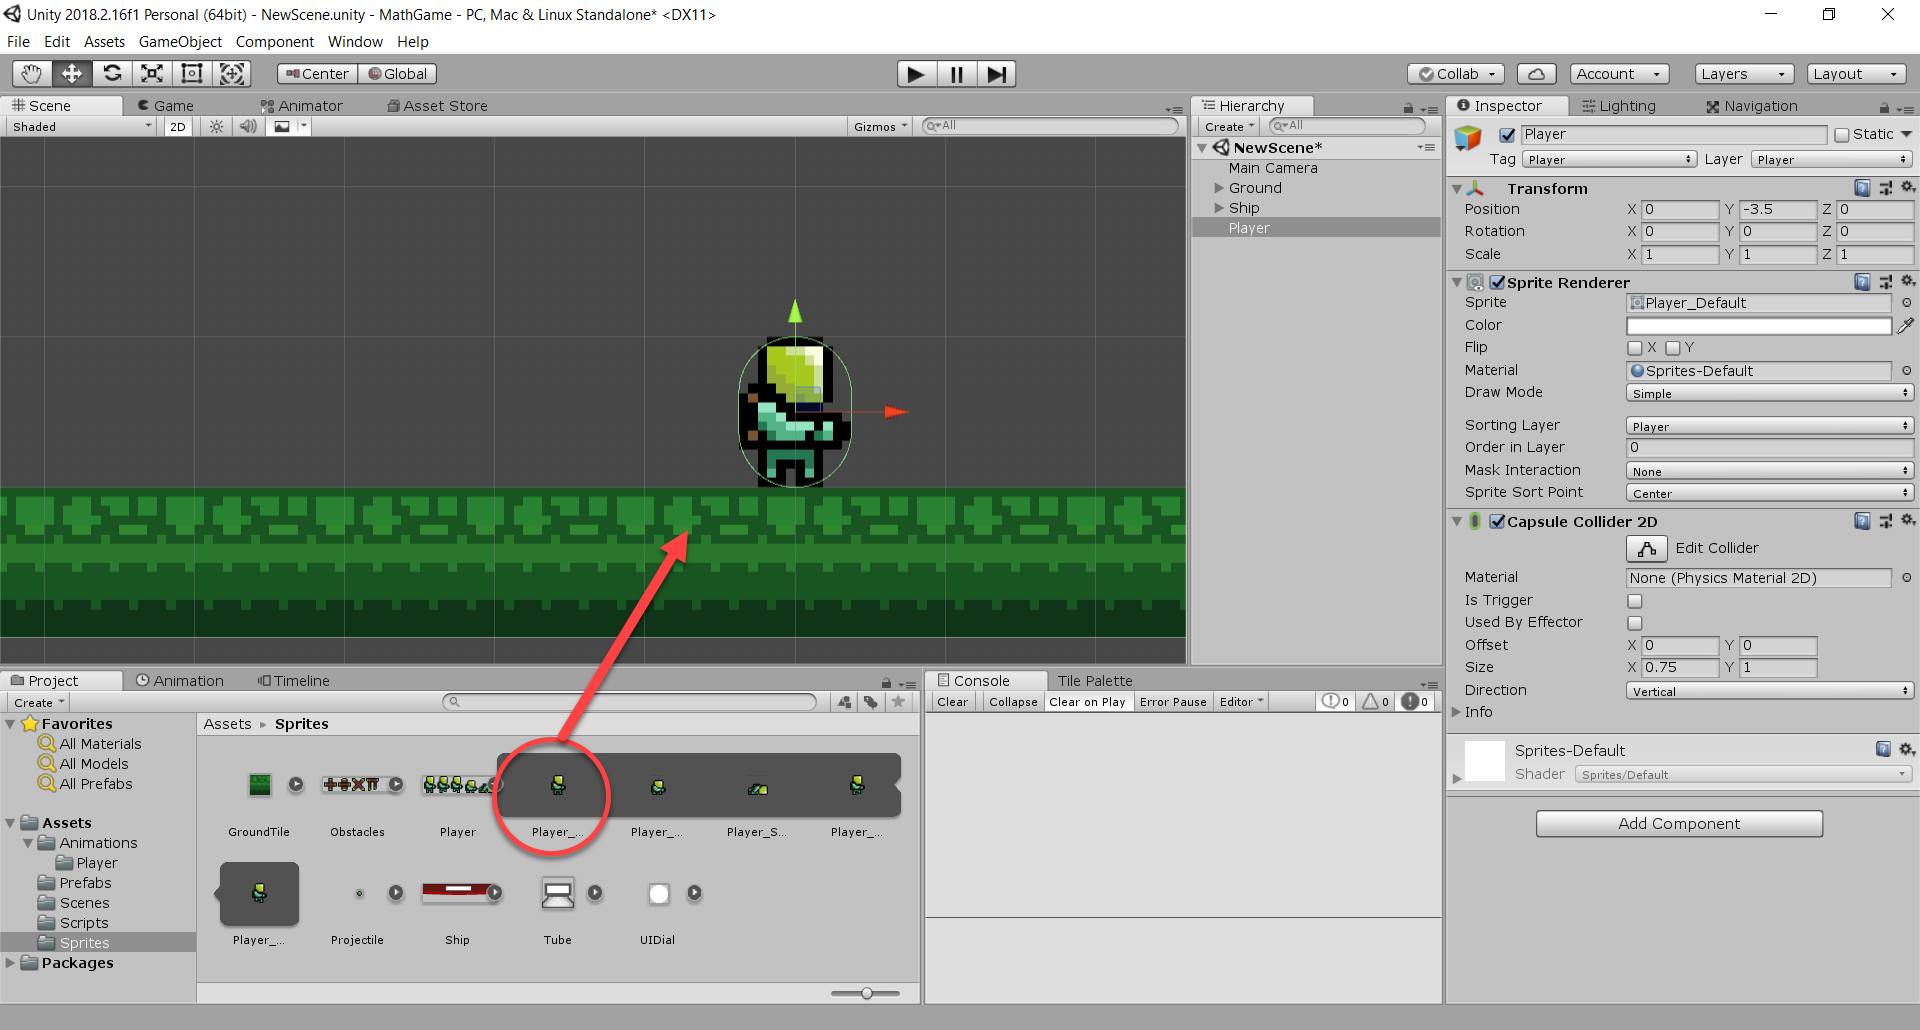 Player character added to Unity educational math game in Scene editor.